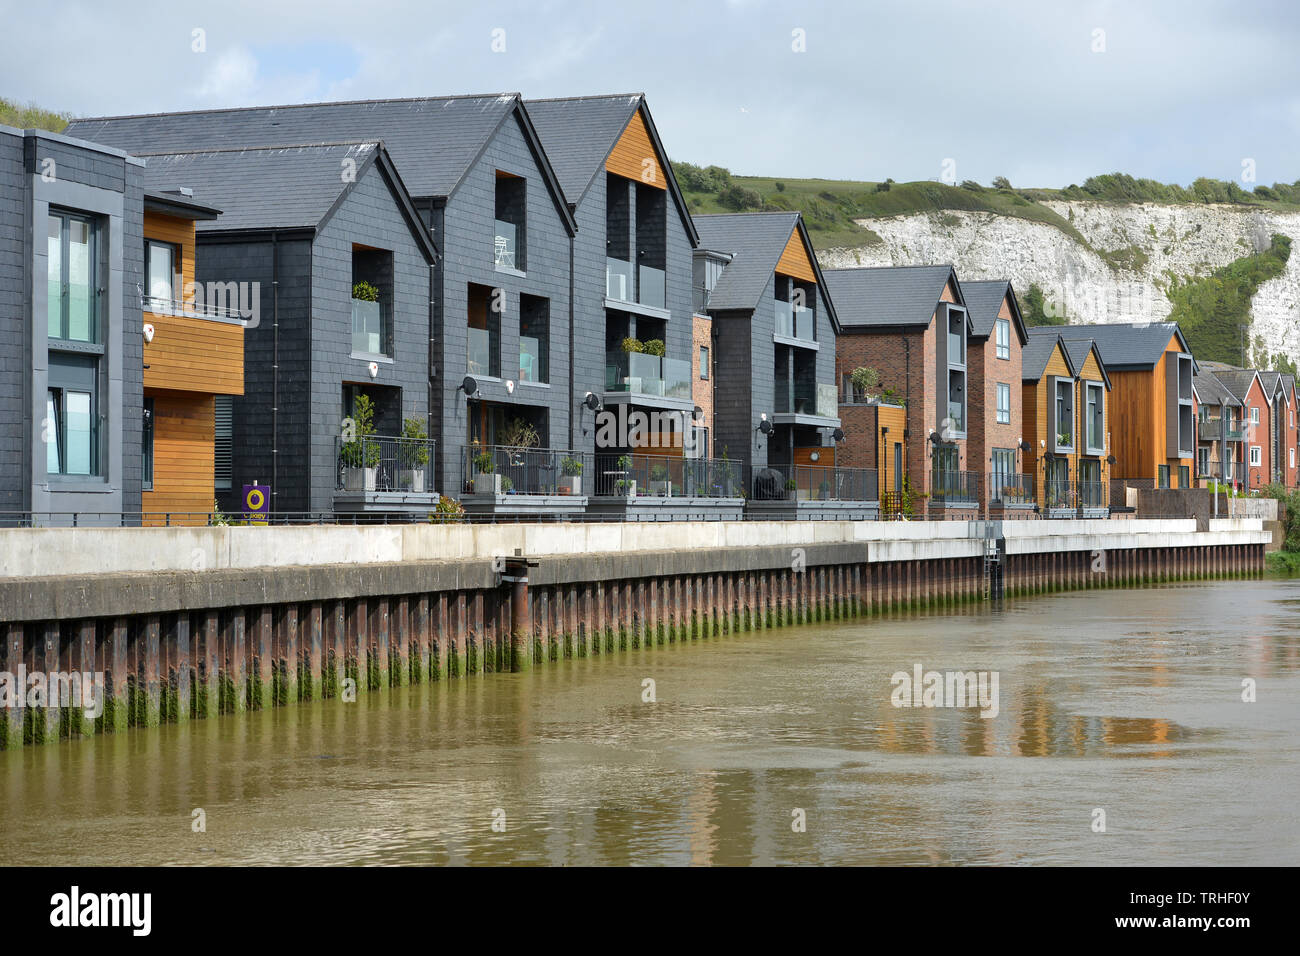 Chandlers Wharf, nuovo waterfront homes in Lewes, East Sussex, Regno Unito Foto Stock